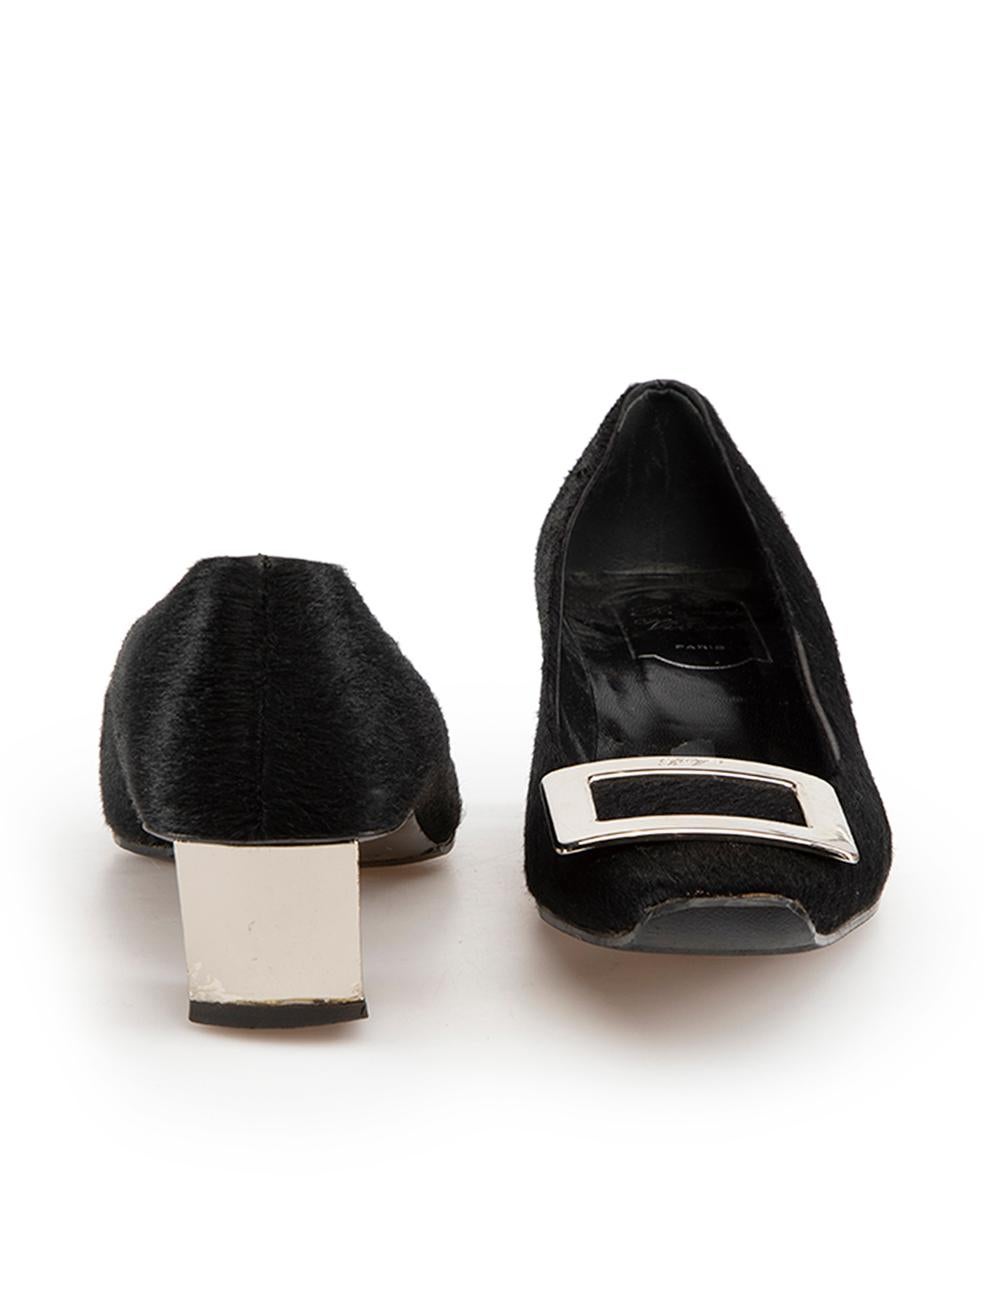 Roger Vivier Black Pony Hair Buckle Detail Pumps Size IT 38 In Good Condition For Sale In London, GB